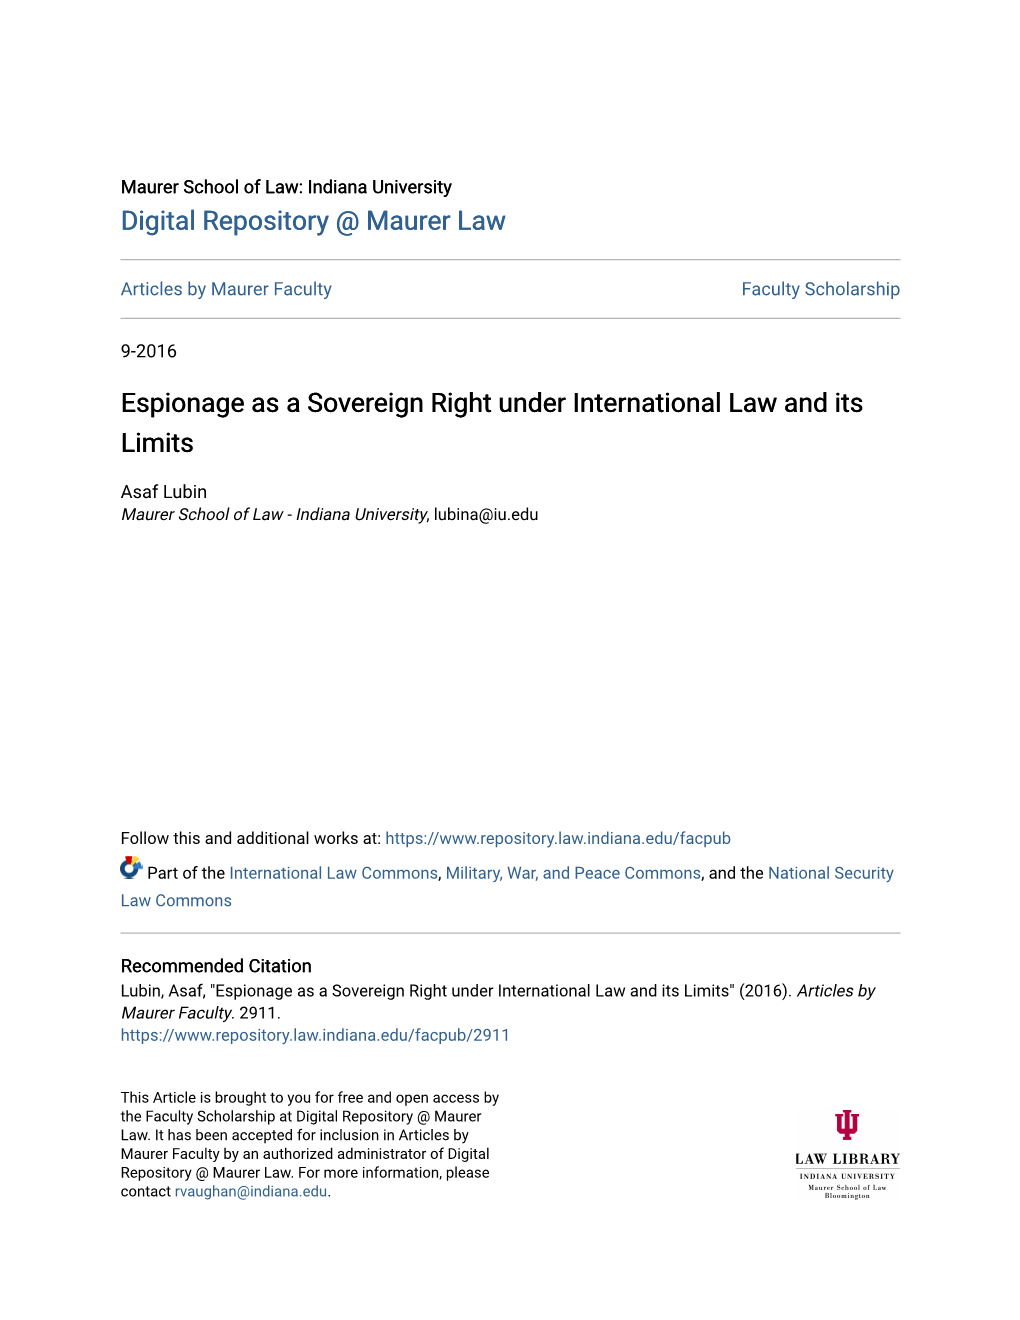 Espionage As a Sovereign Right Under International Law and Its Limits